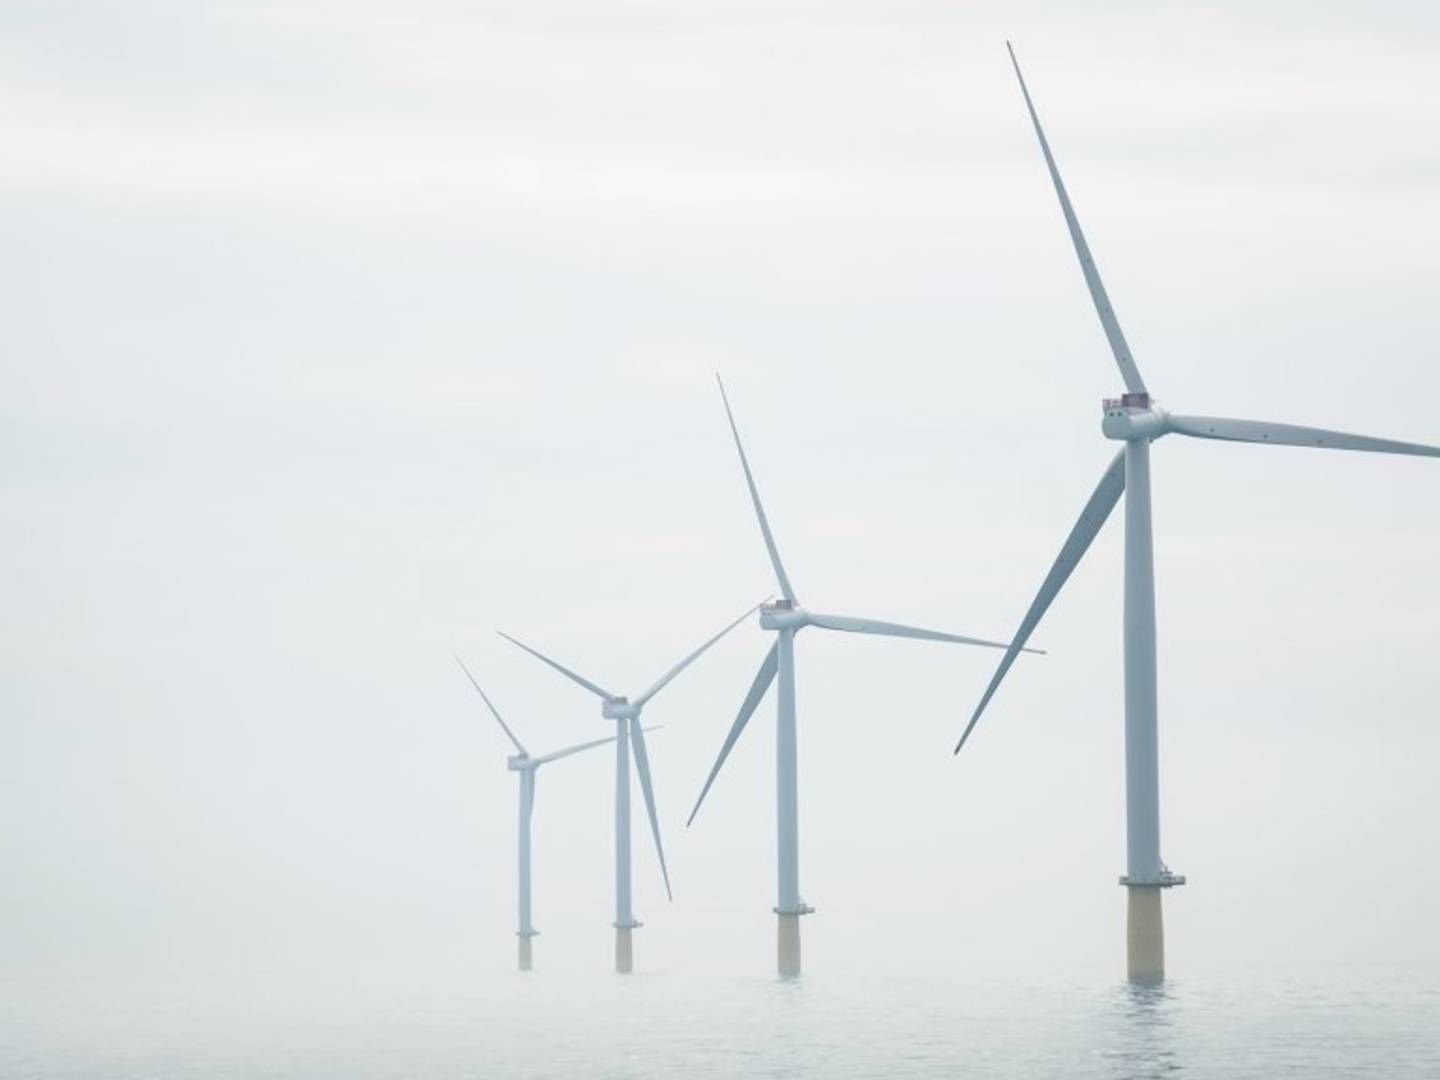 Empire Wind has a planned capacity of 816 MW. | Photo: Equinor